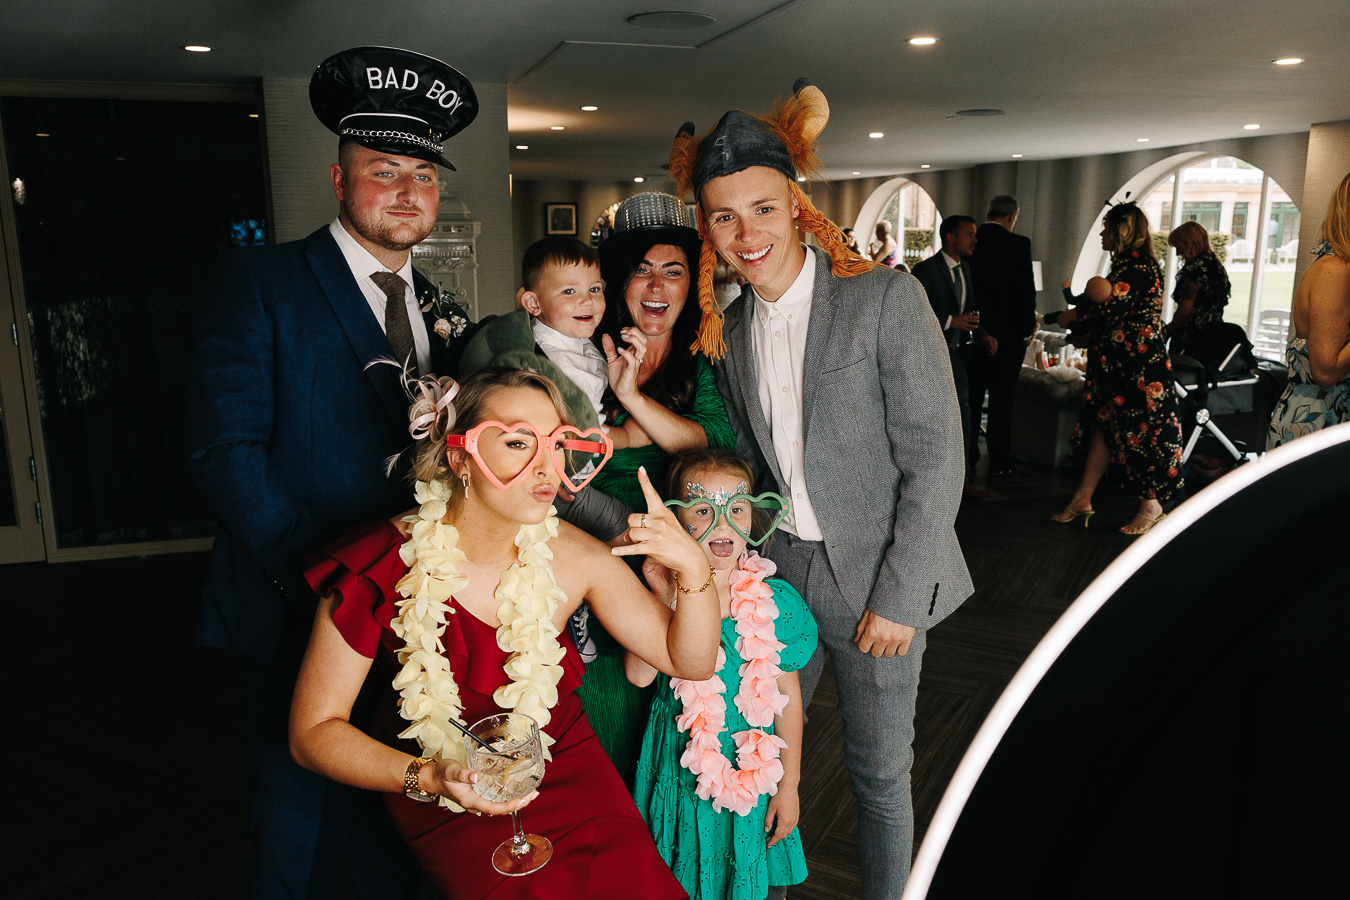 photobooth with wedding guests inside